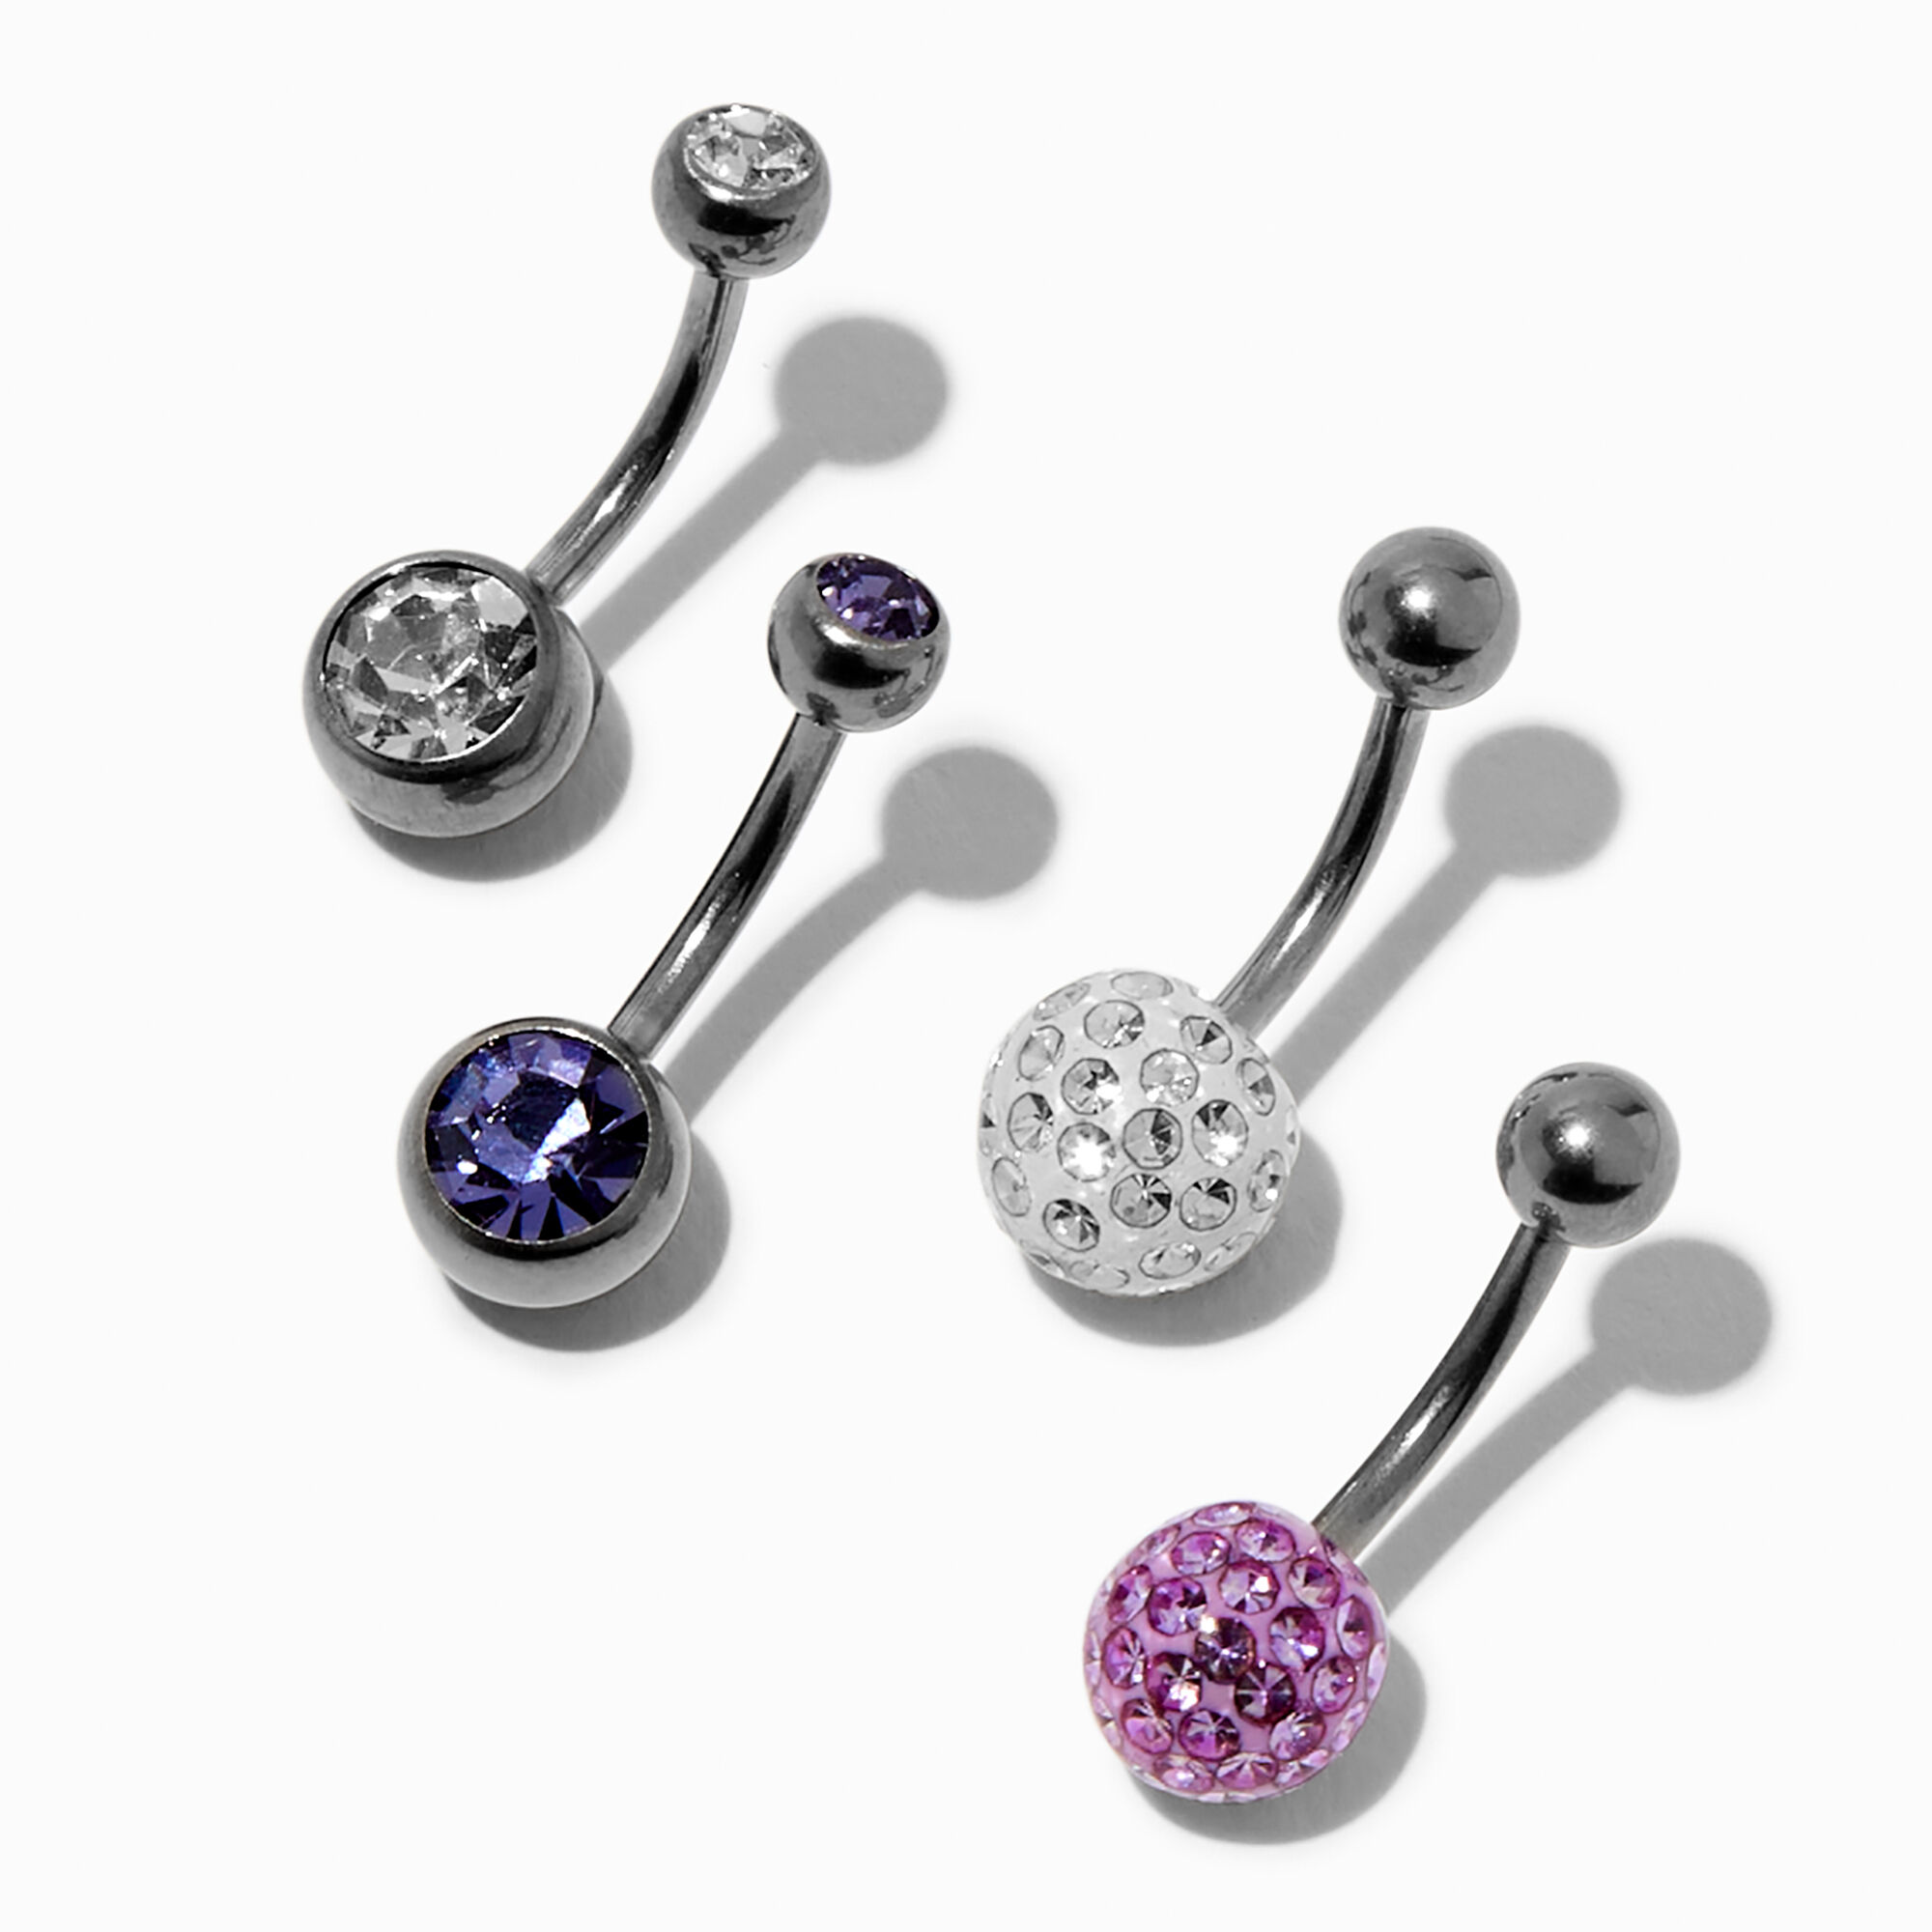 View Claires SilverTone Fireball 14G Belly Bars 4 Pack Purple information